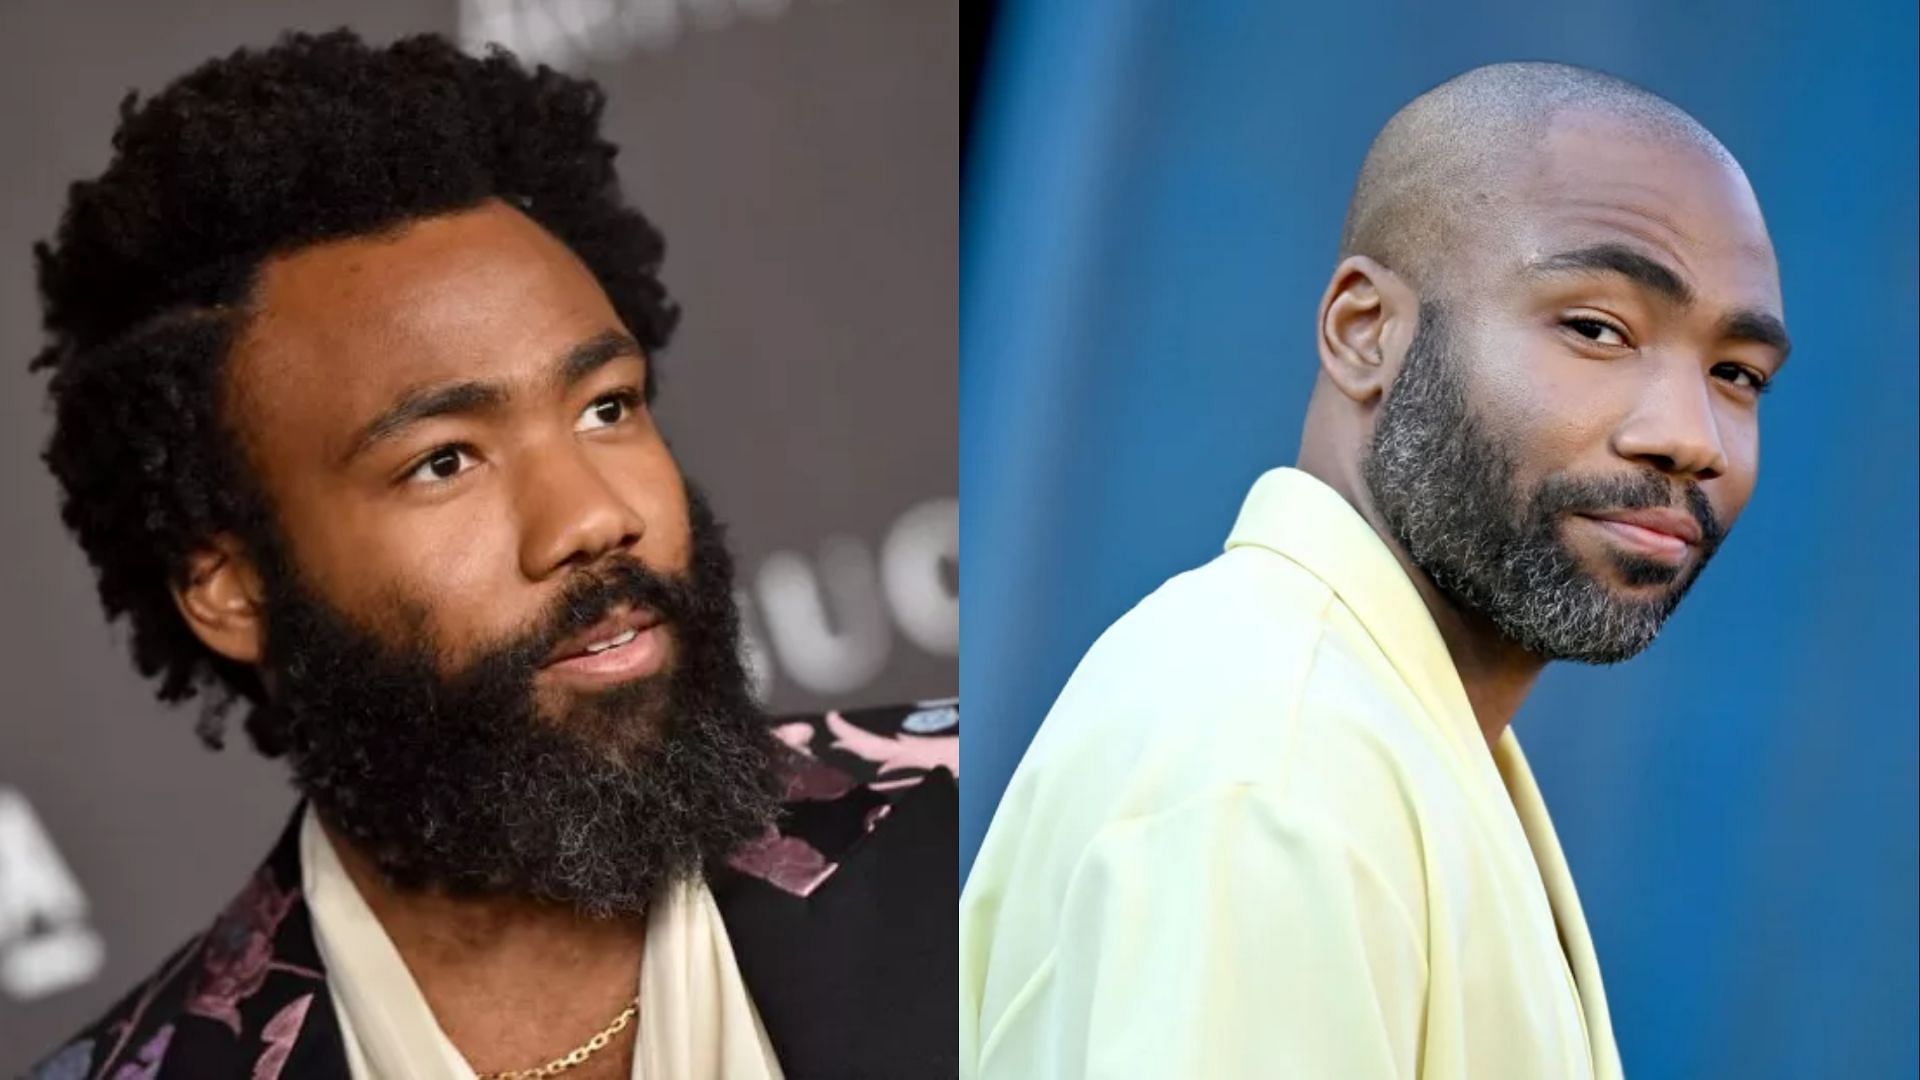 Donald Glover came under fire after allegations were brought against him hating on Black women. (Image via Getty Images)